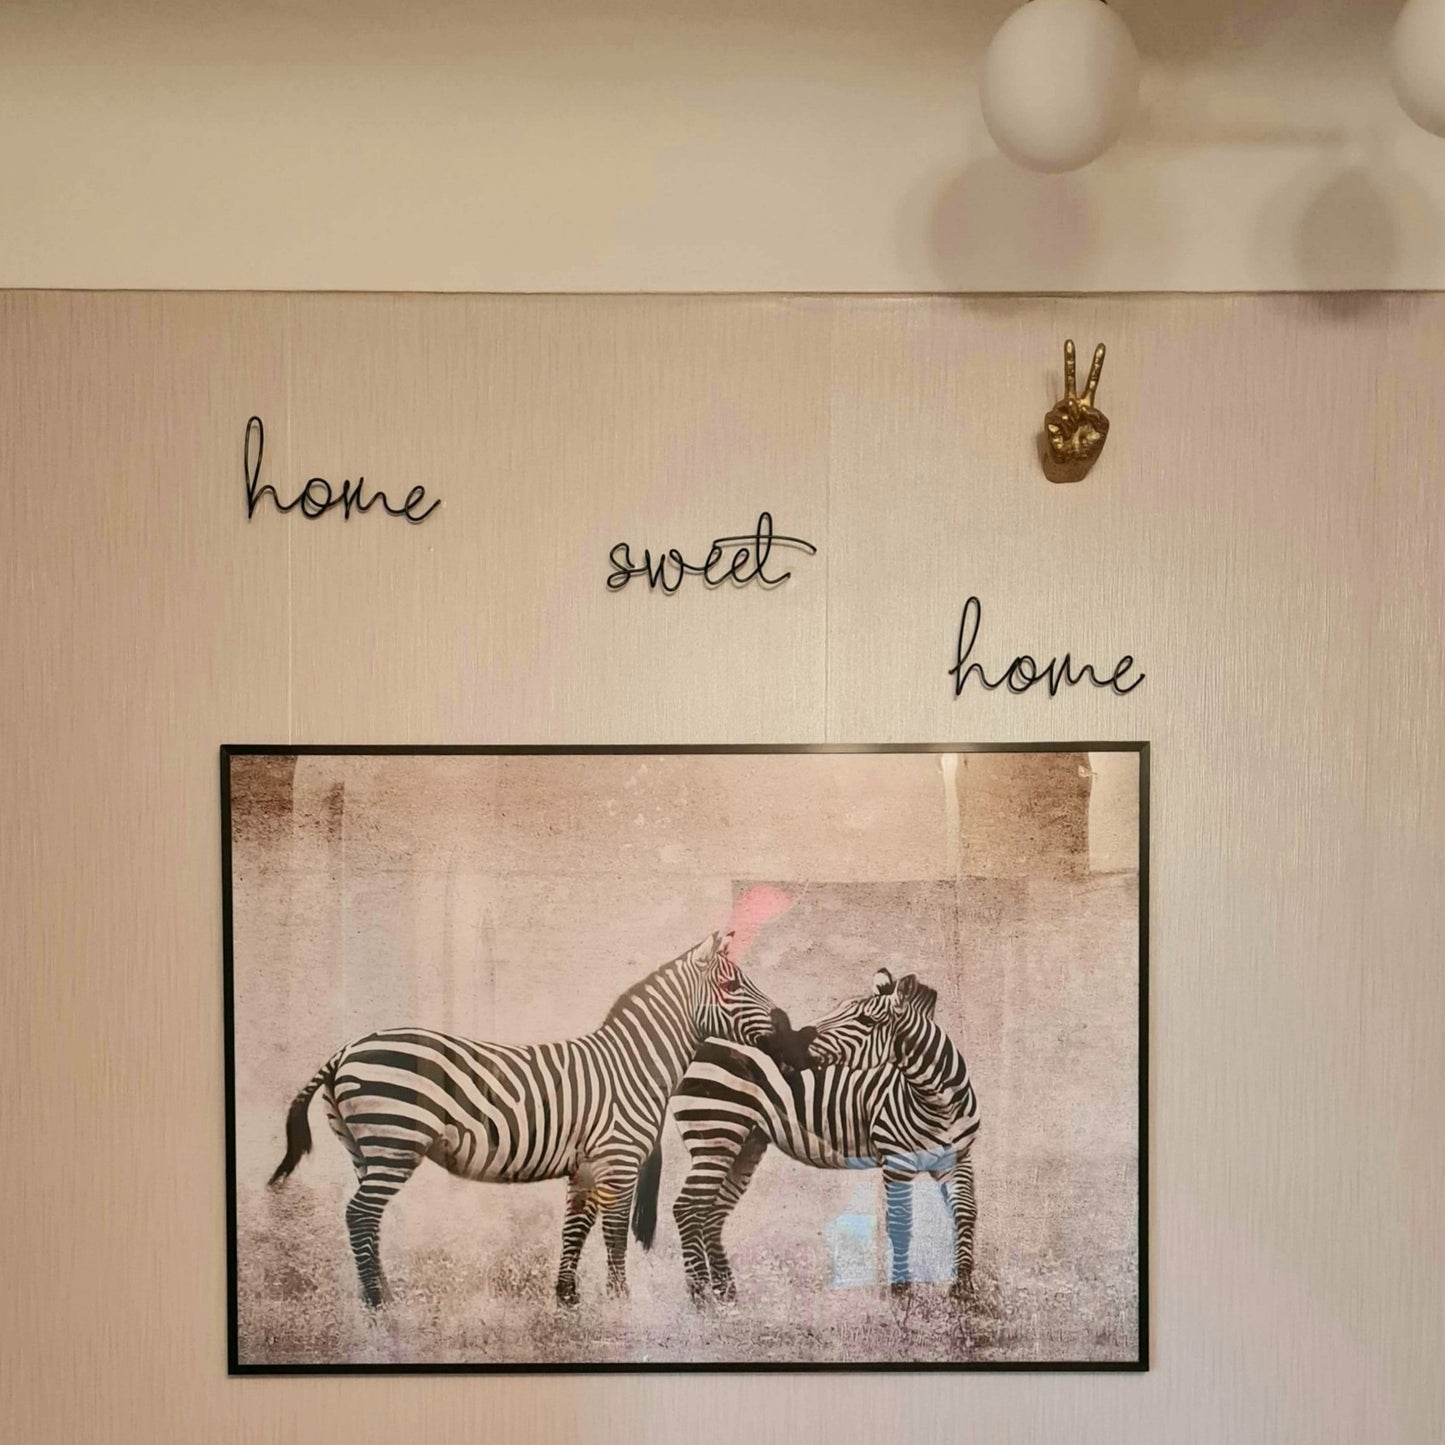 Black Home Sweet Home wire word wall hung on a wall above an art print of Zebras